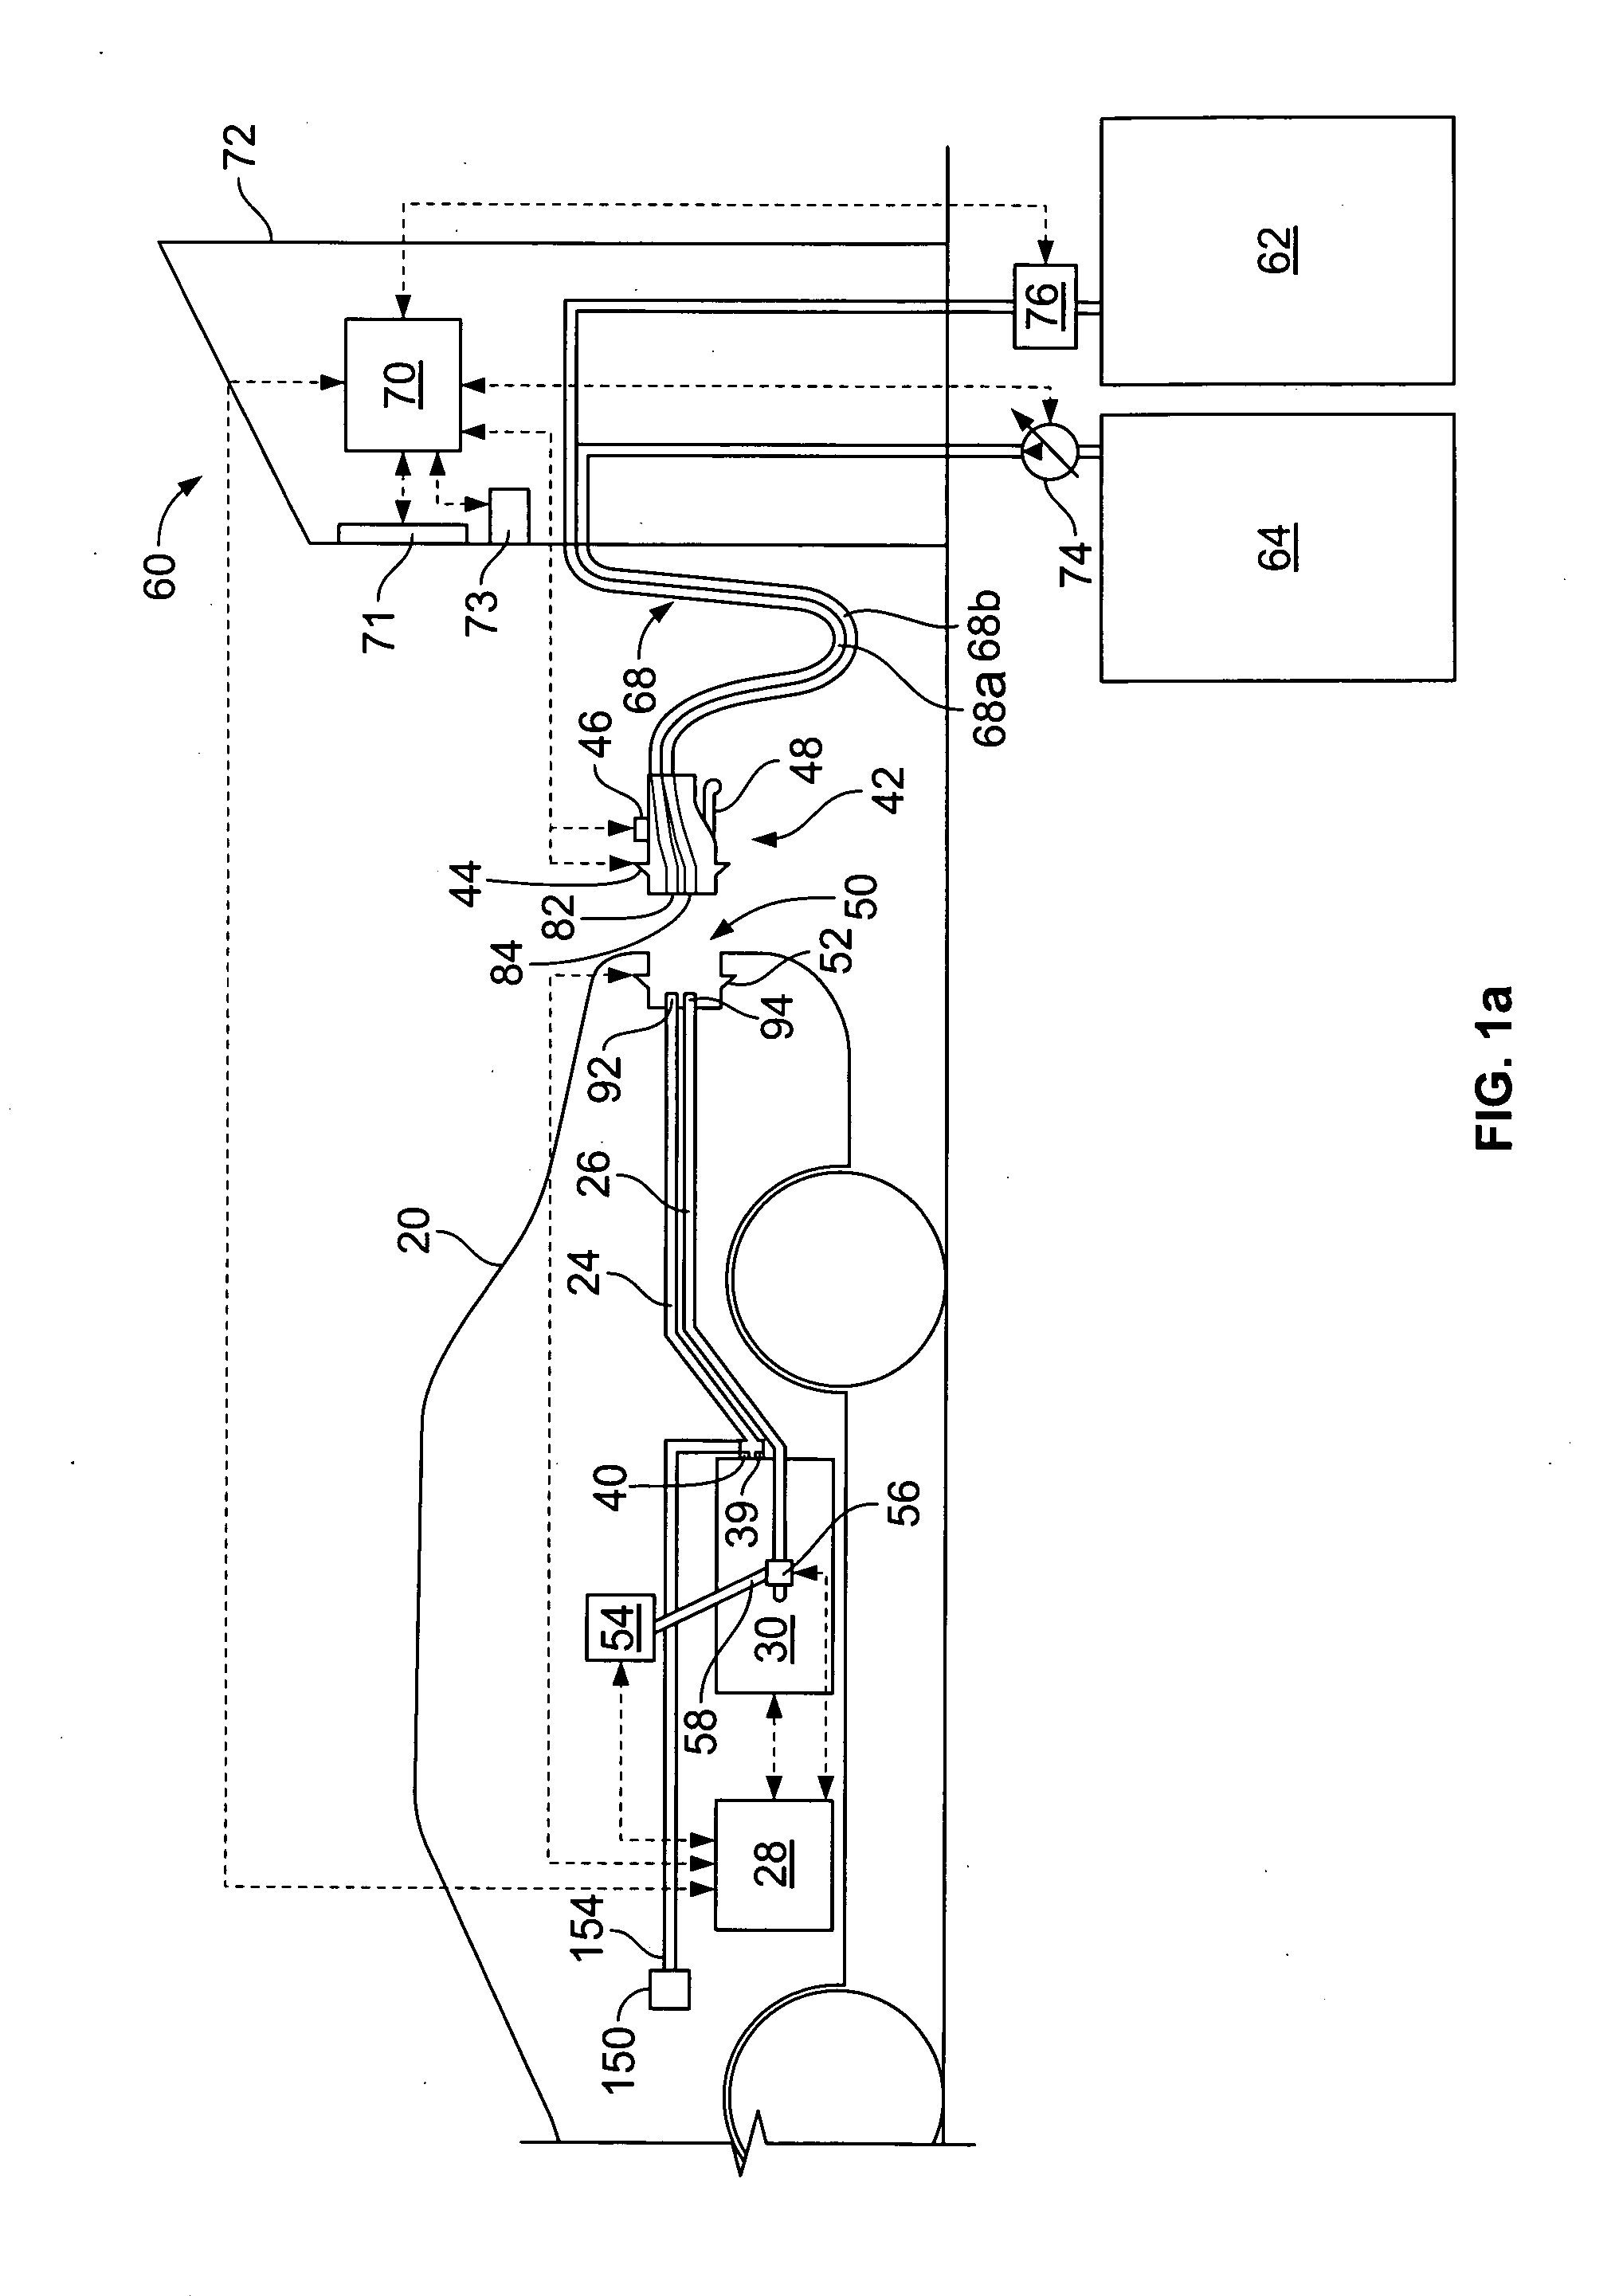 Rapid charging electric vehicle and method and apparatus for rapid charging